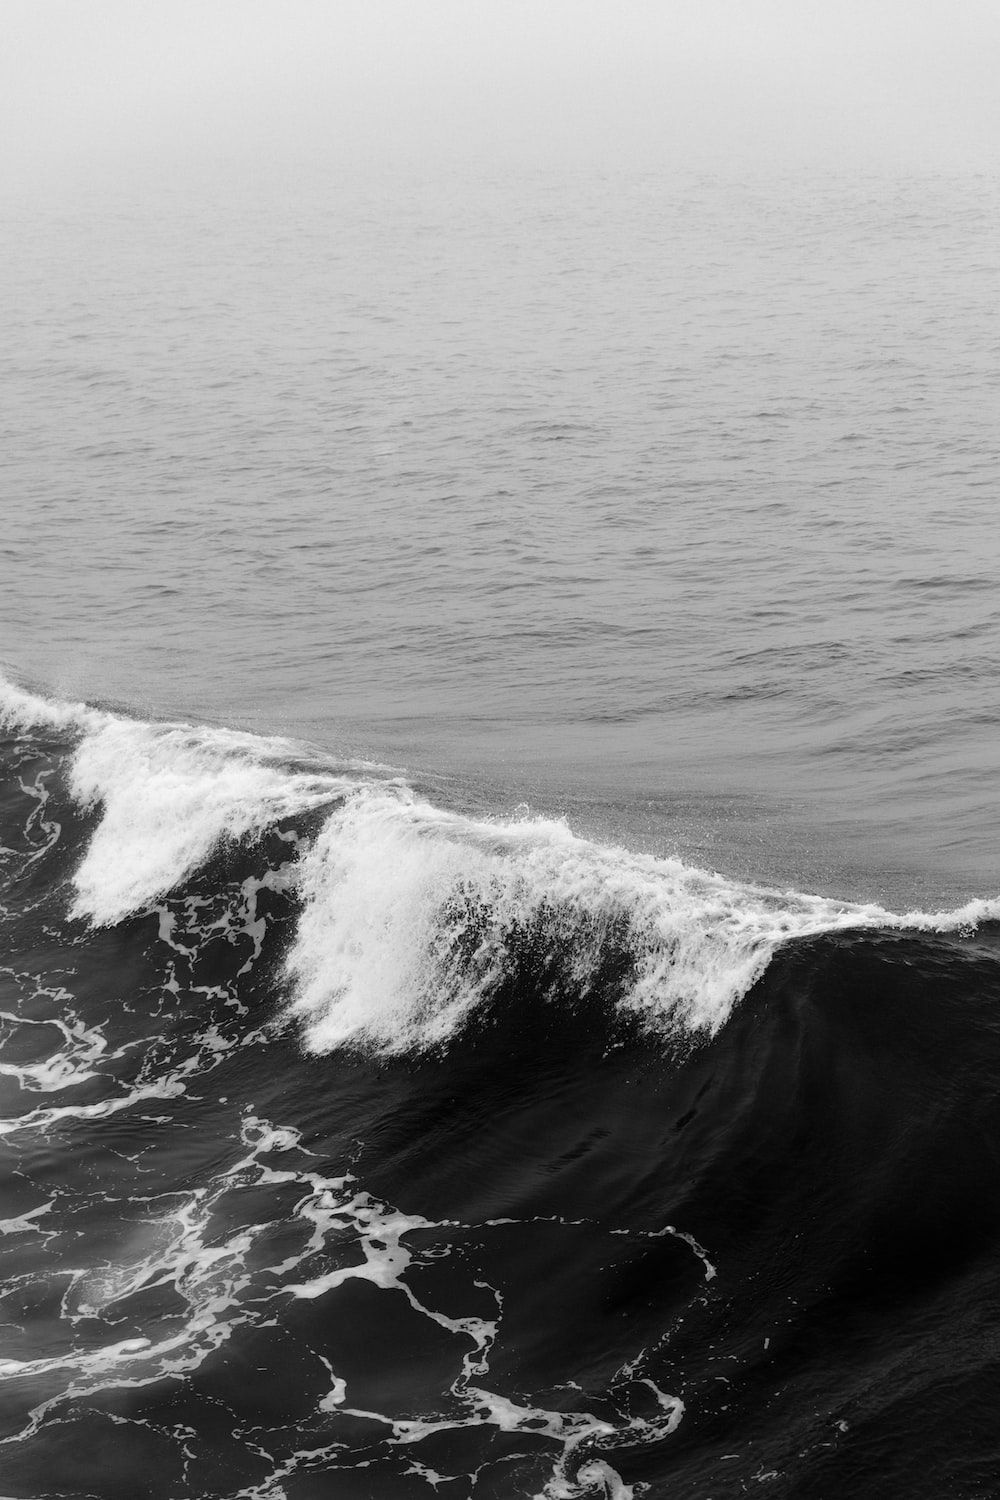 A black and white photo of a wave - Ocean